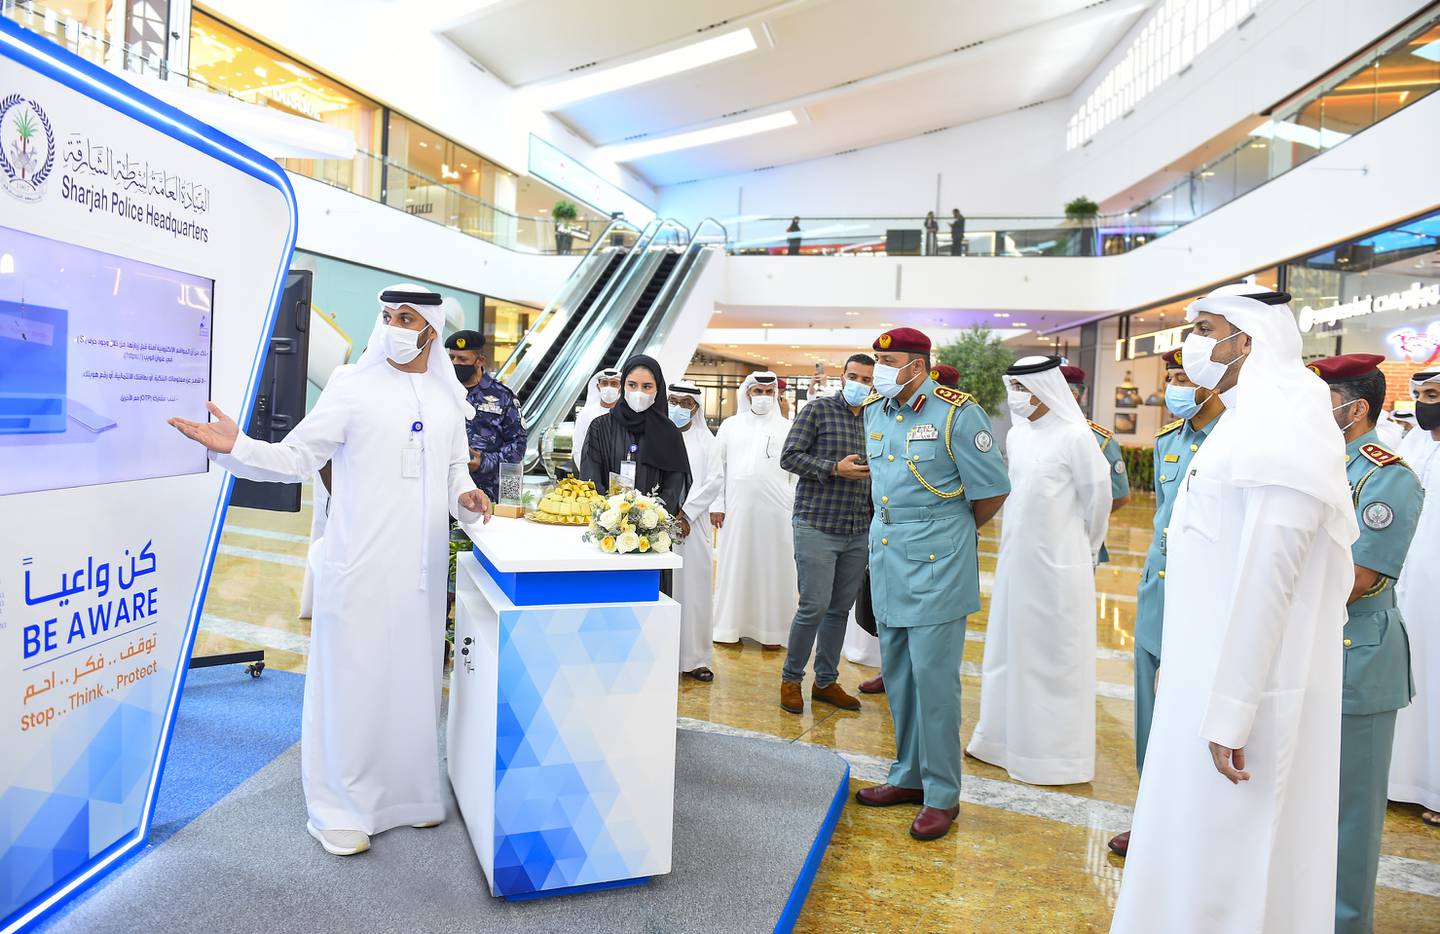 Sharjah Police have set up a booth at City Centre Al Zahia to advise people about cyber crimes. Photo: Sharjah Police